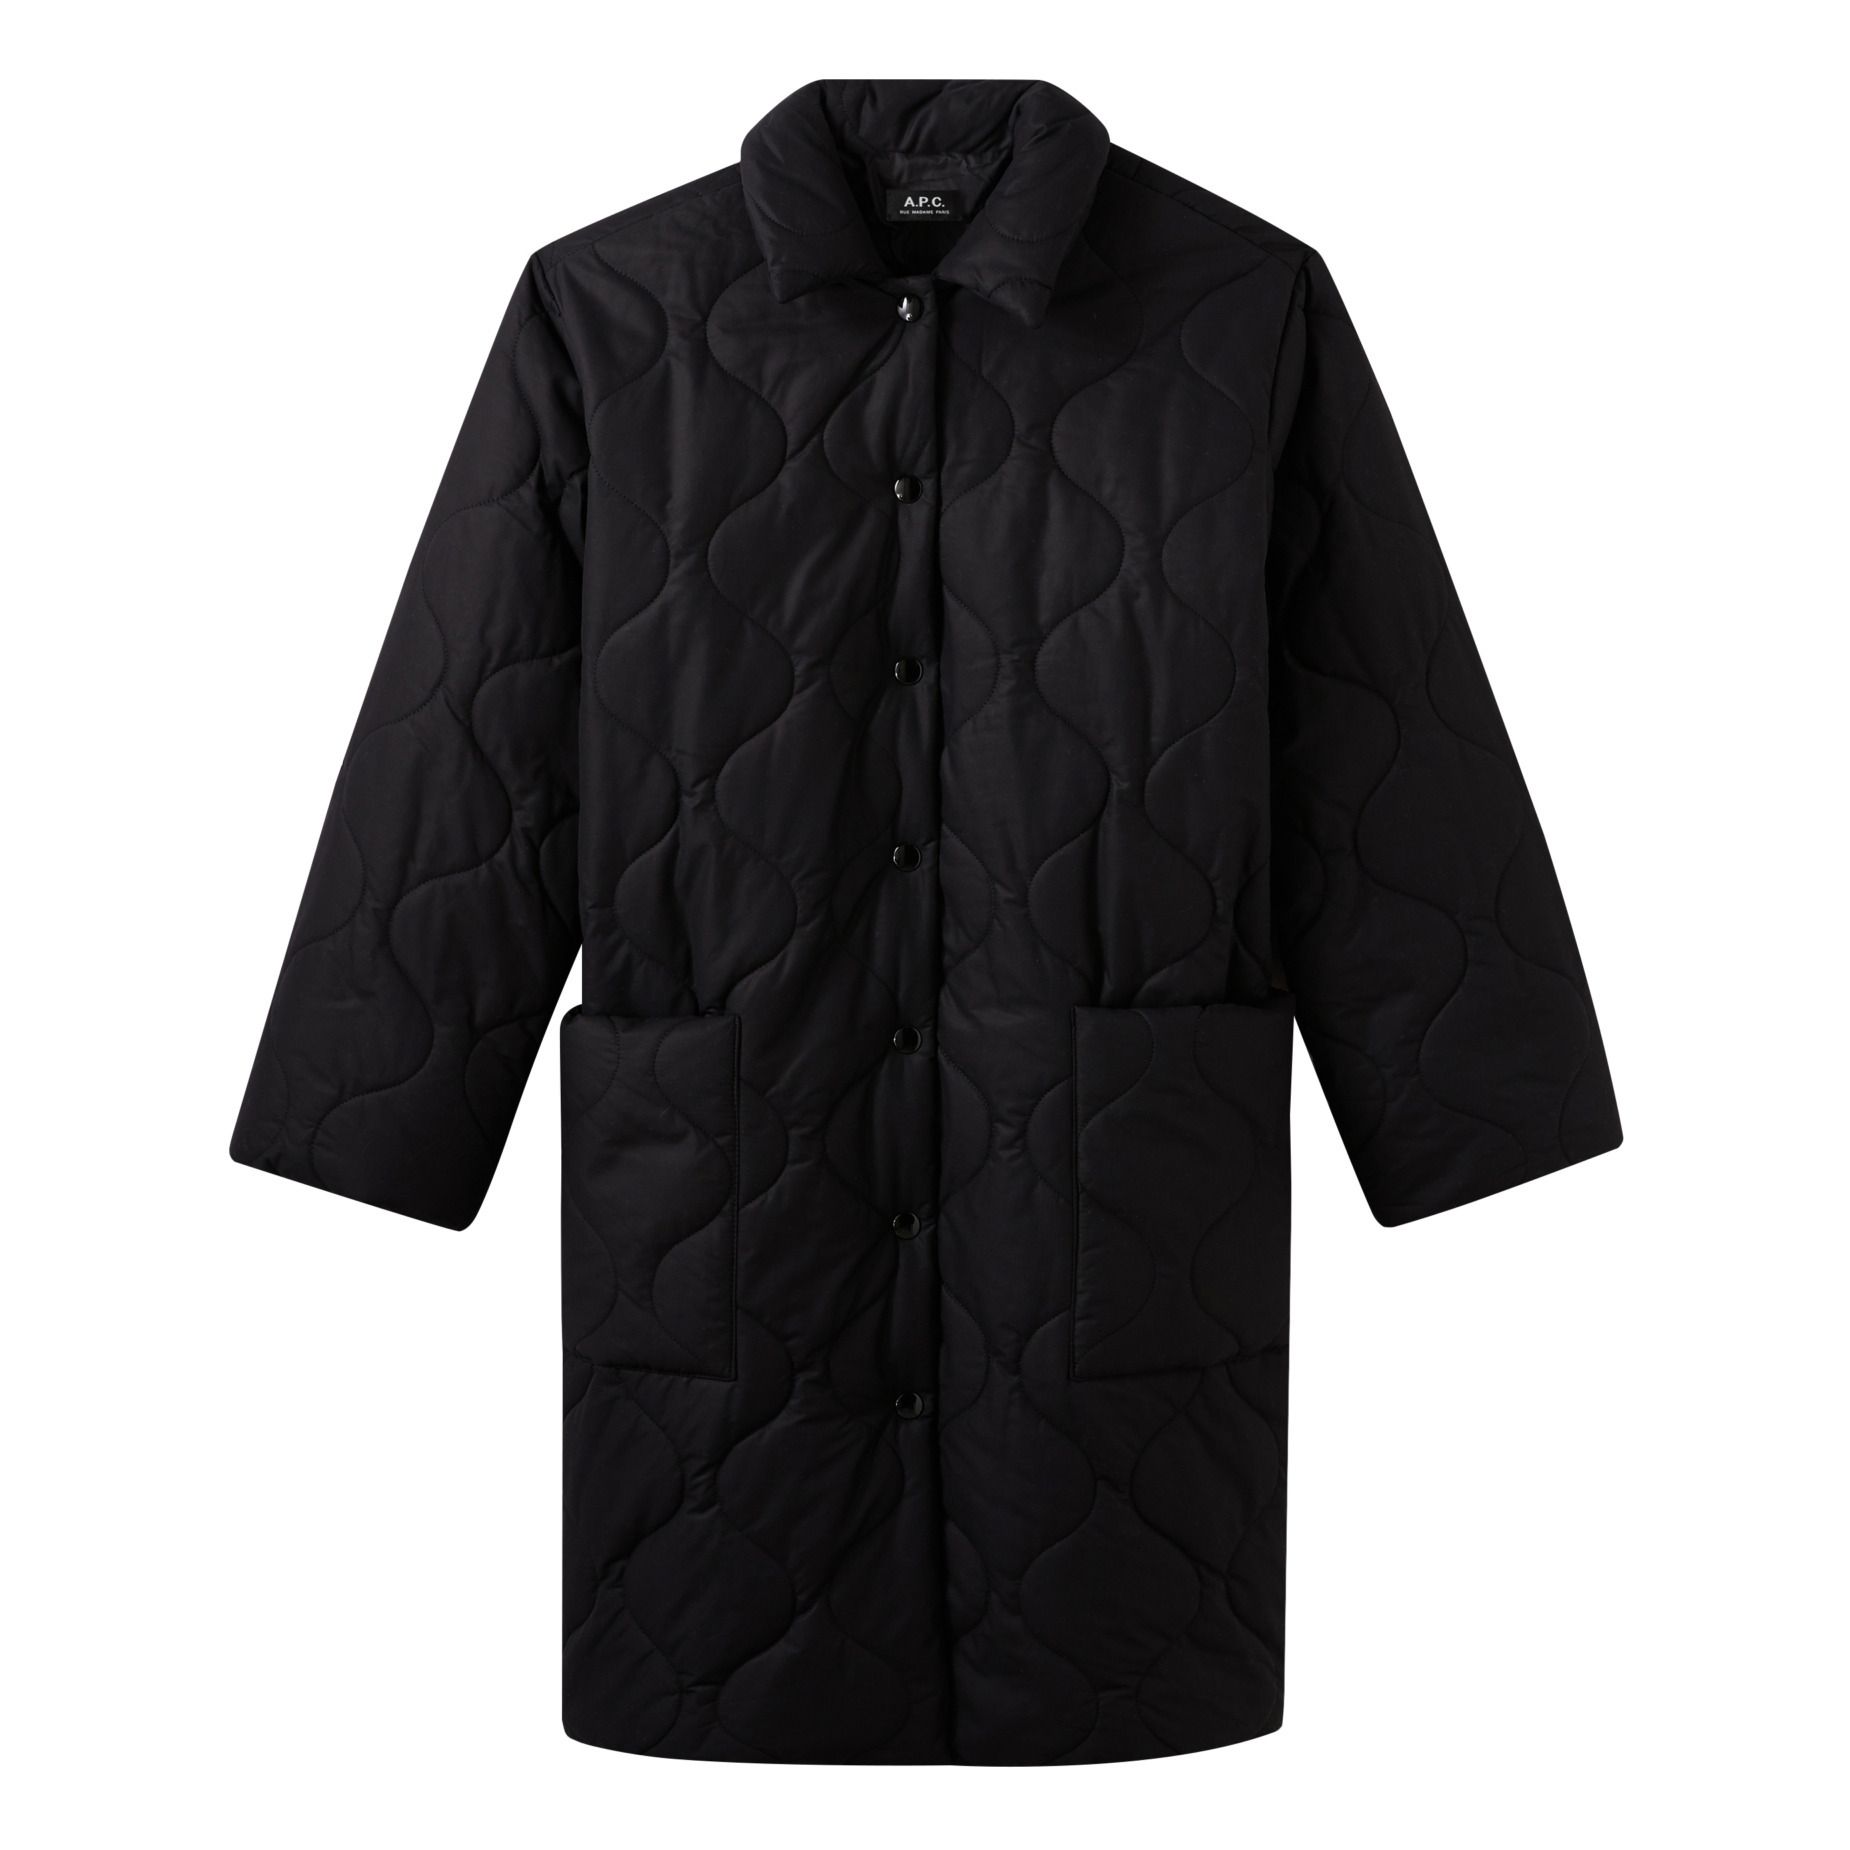 A.P.C. - Sarah Quilted Coat - Black | Smallable